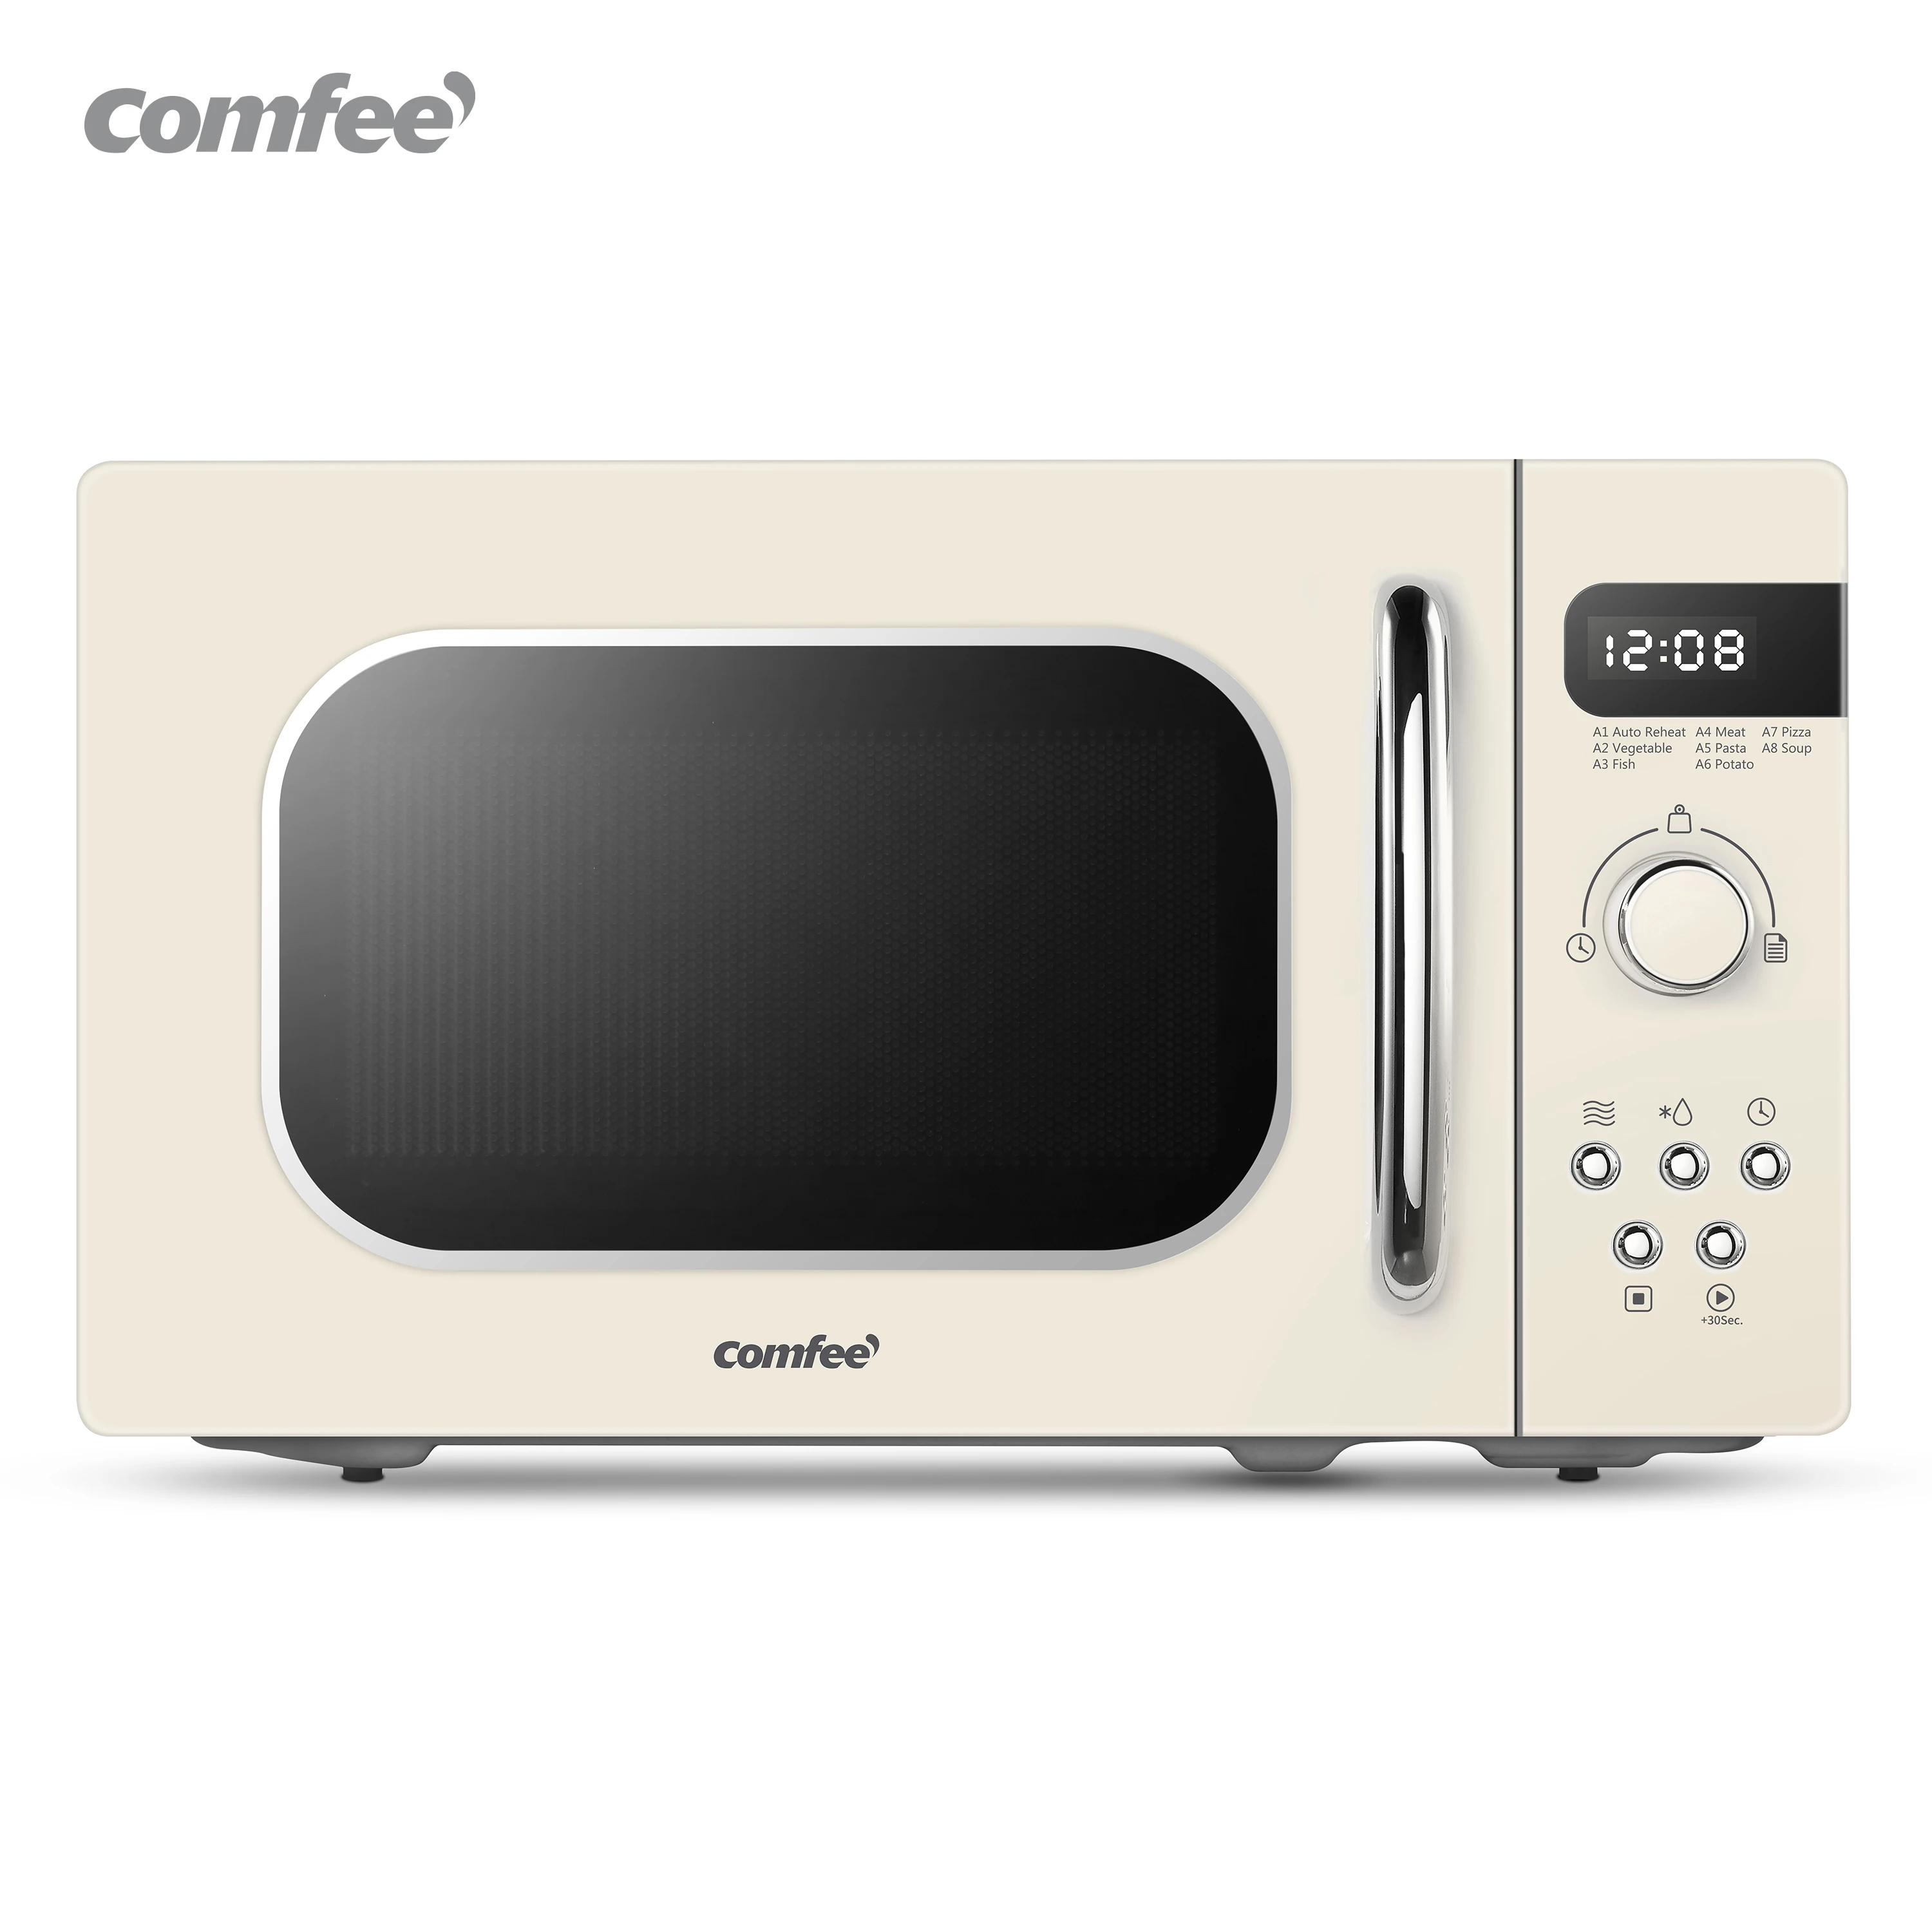 

COMFEE White Retro Style 800w 20L Microwave Oven with 8 Auto Menus 5 Cooking Power Levels and Express Cook Button Mint Green